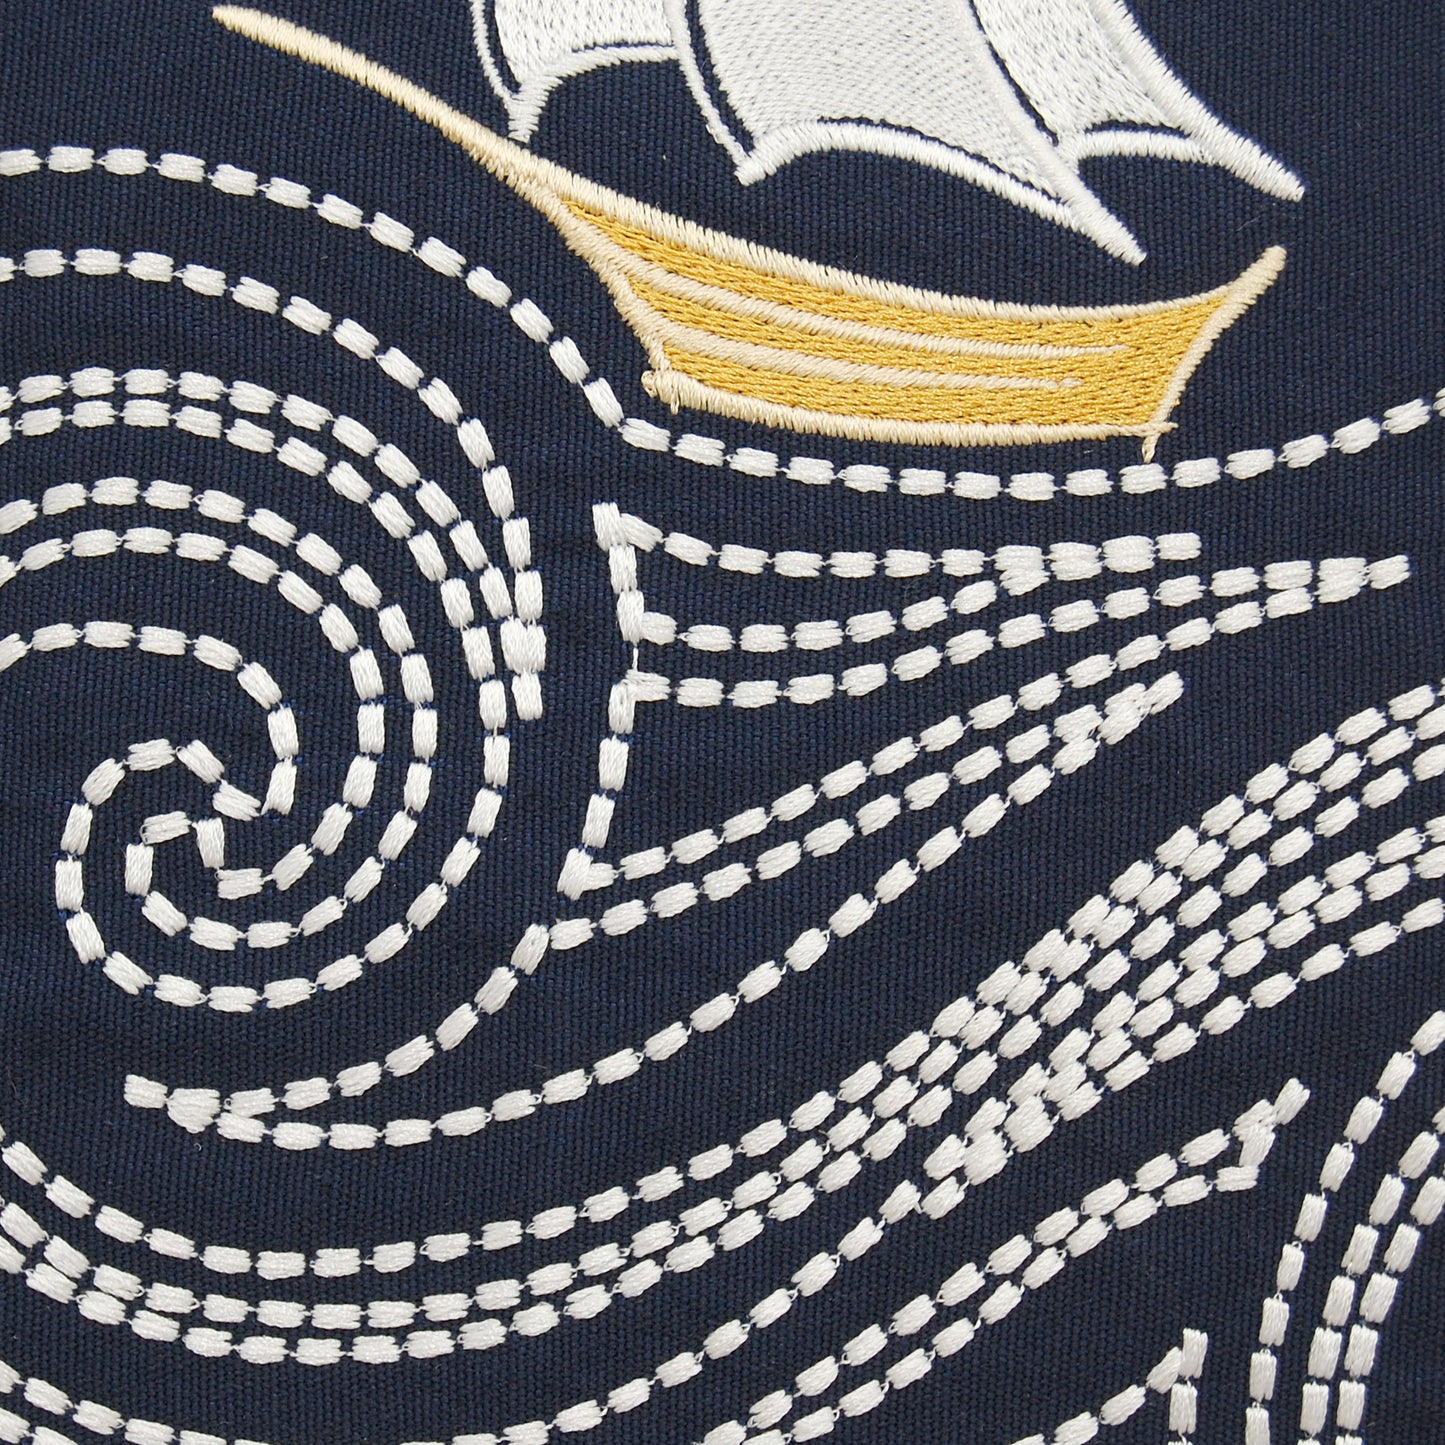 Detail shot of the embroidered sail boat and waves on the Cape Series Stormy Seas pillow.